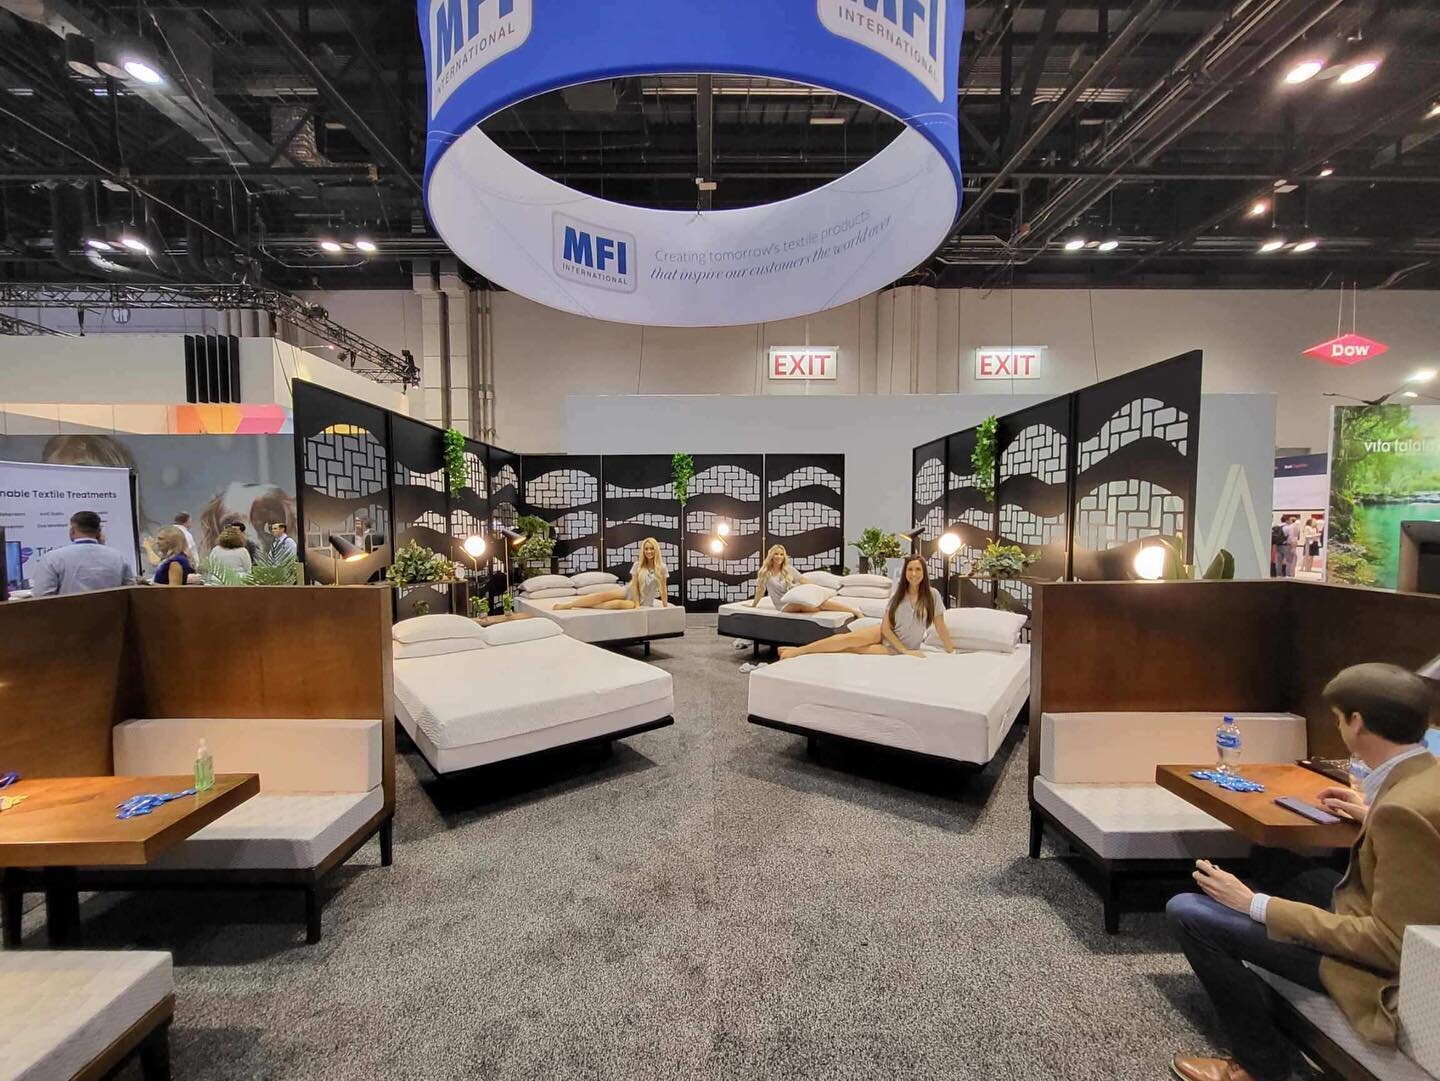 MFI International wanted a refresh for their trade booth divider panels. It was important that they could be arranged in any order so we designed a pattern that could accommodate that. Design, fabrication and finishing by Compound. 

📷 @mfiintl 

#d